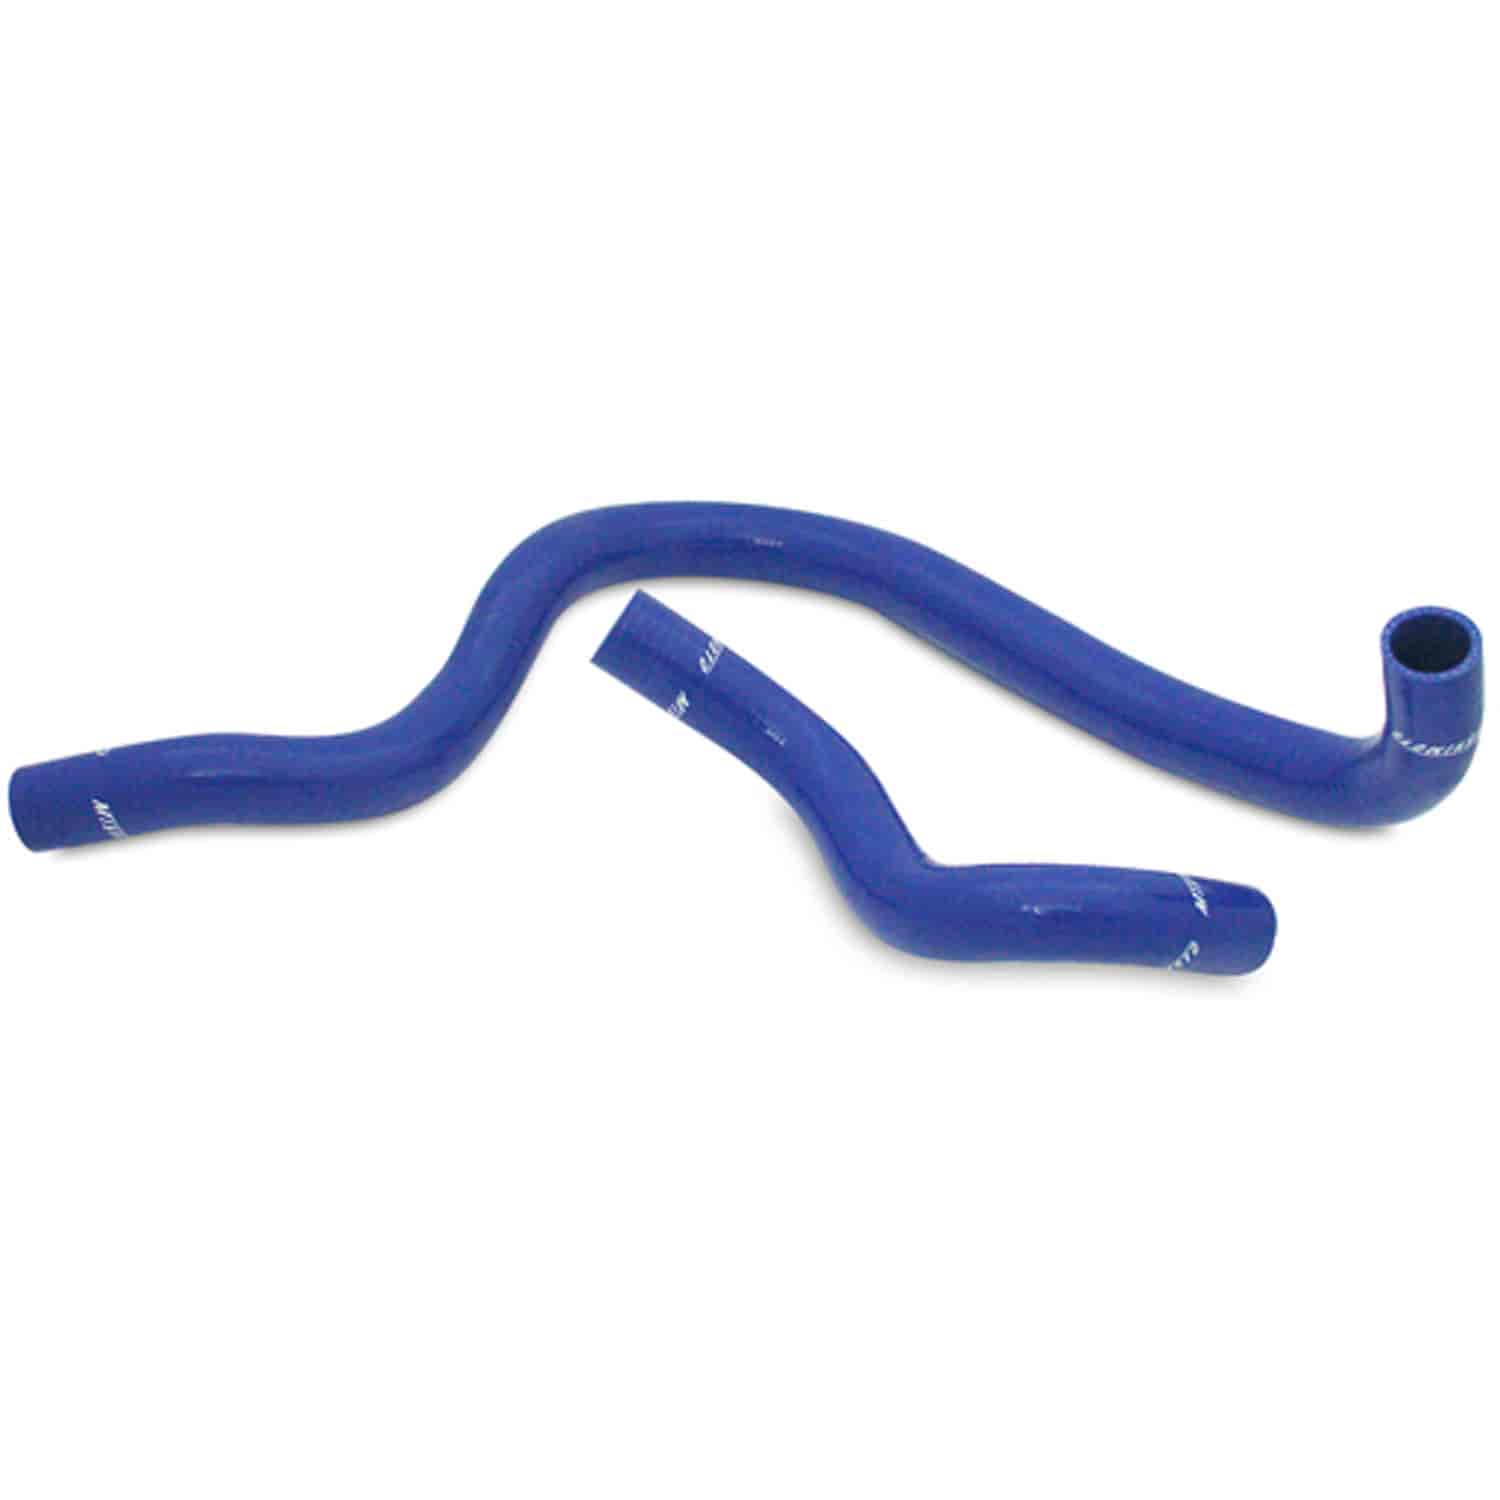 Silicone Radiator Hose Kit.This kit will fit both the Honda Prelude and Accord. - MFG Part No. MMHOSE-PRE-97BL